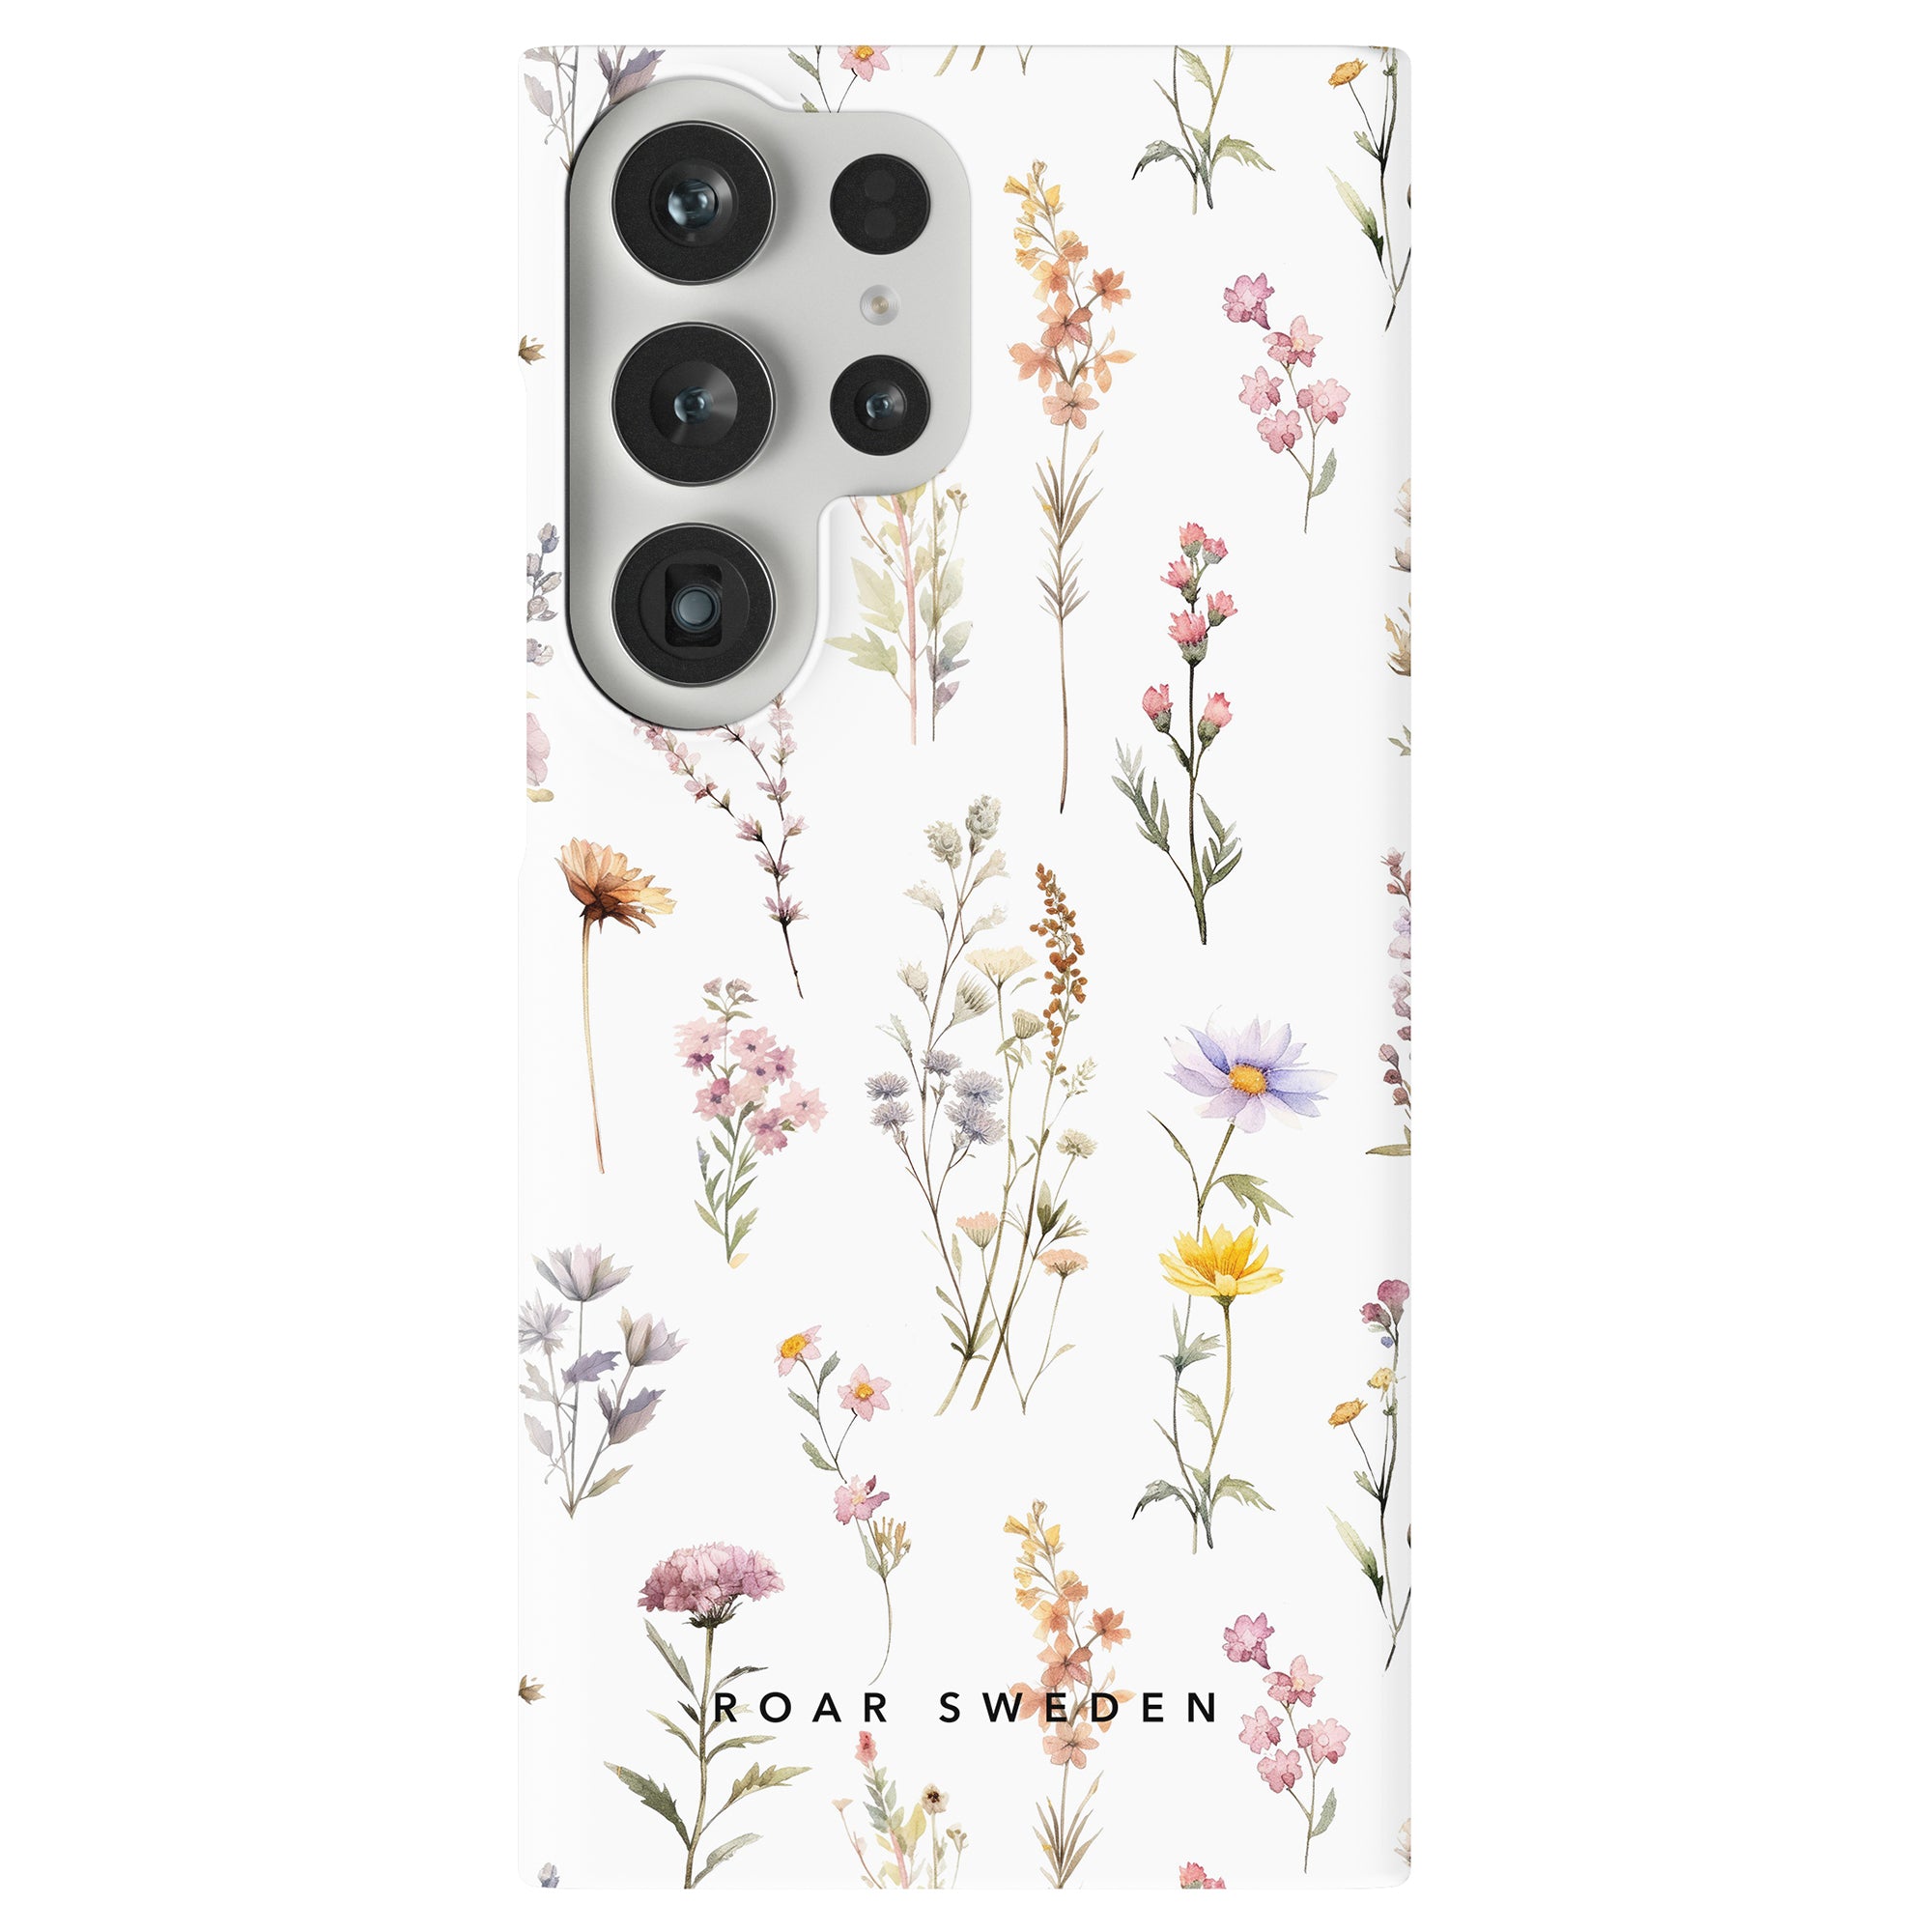 A sturdy smartphone with a Wild Flowers - Slim case featuring multiple camera lenses.